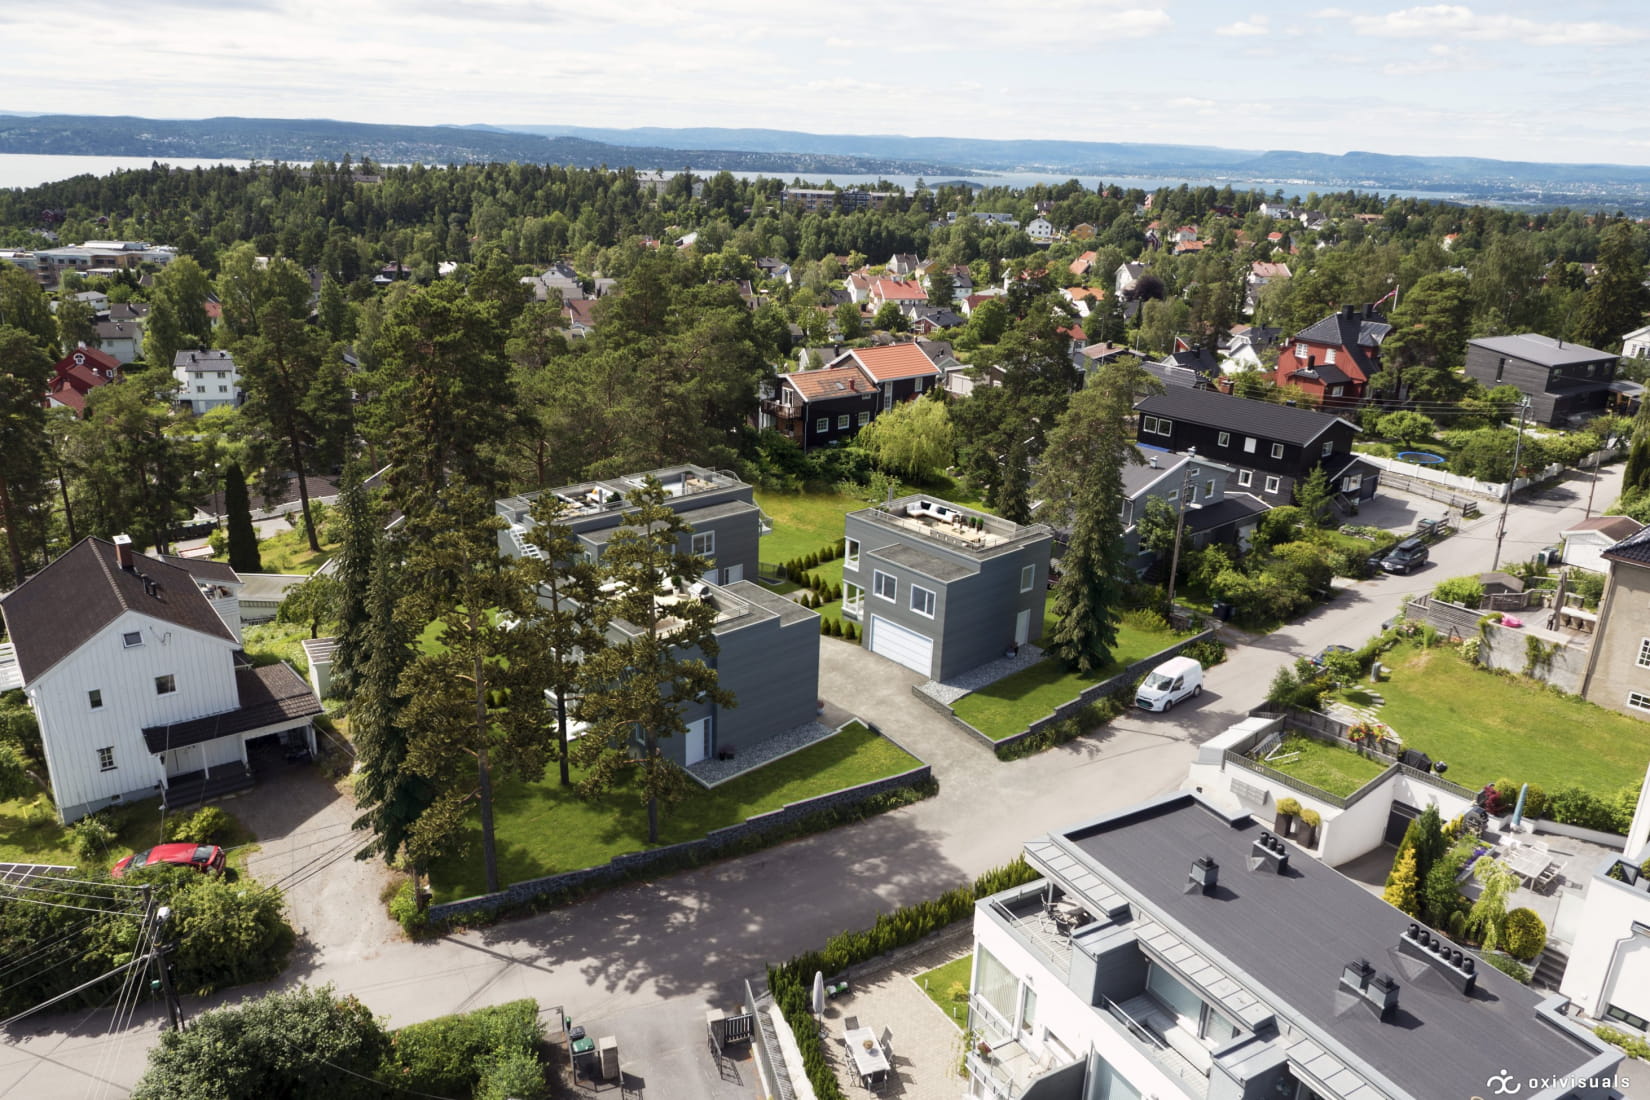 visualization-of-new-housing-project-in-oslo